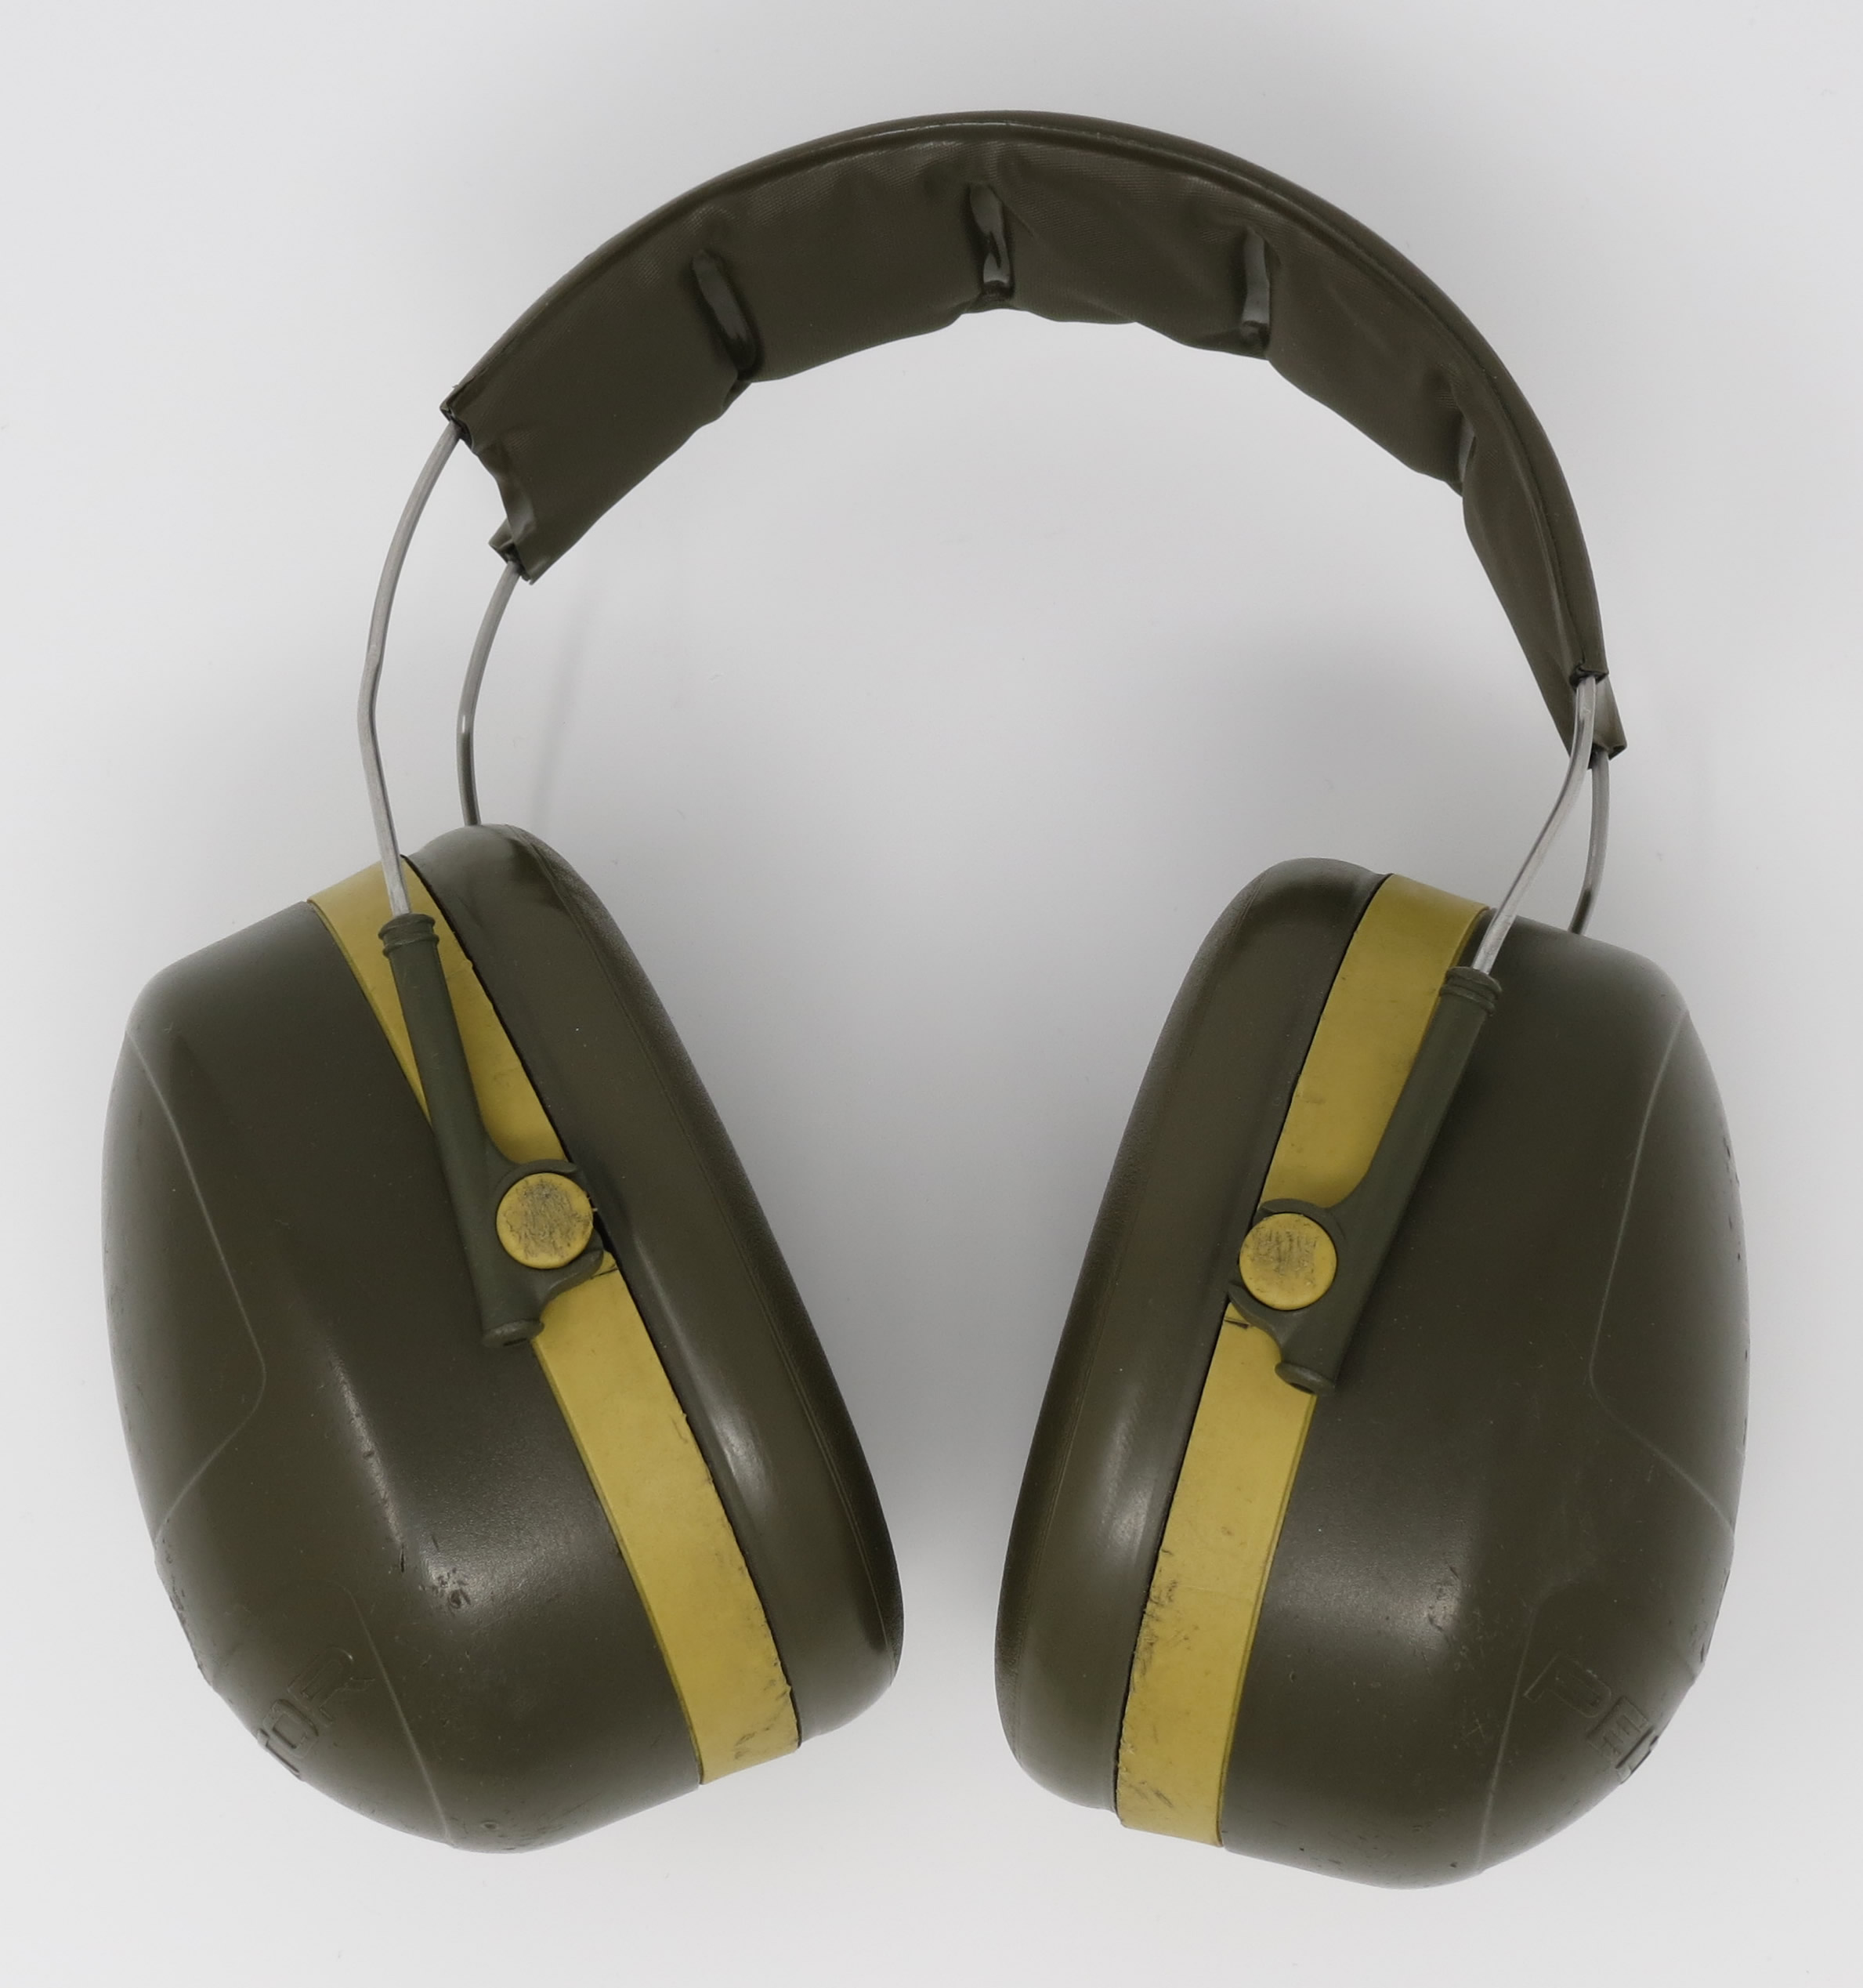 BRITISH ARMY SURPLUS ISSUE GREEN PELTOR PROTECTIVE NECKBAND EAR DEFENDERS H10A, 